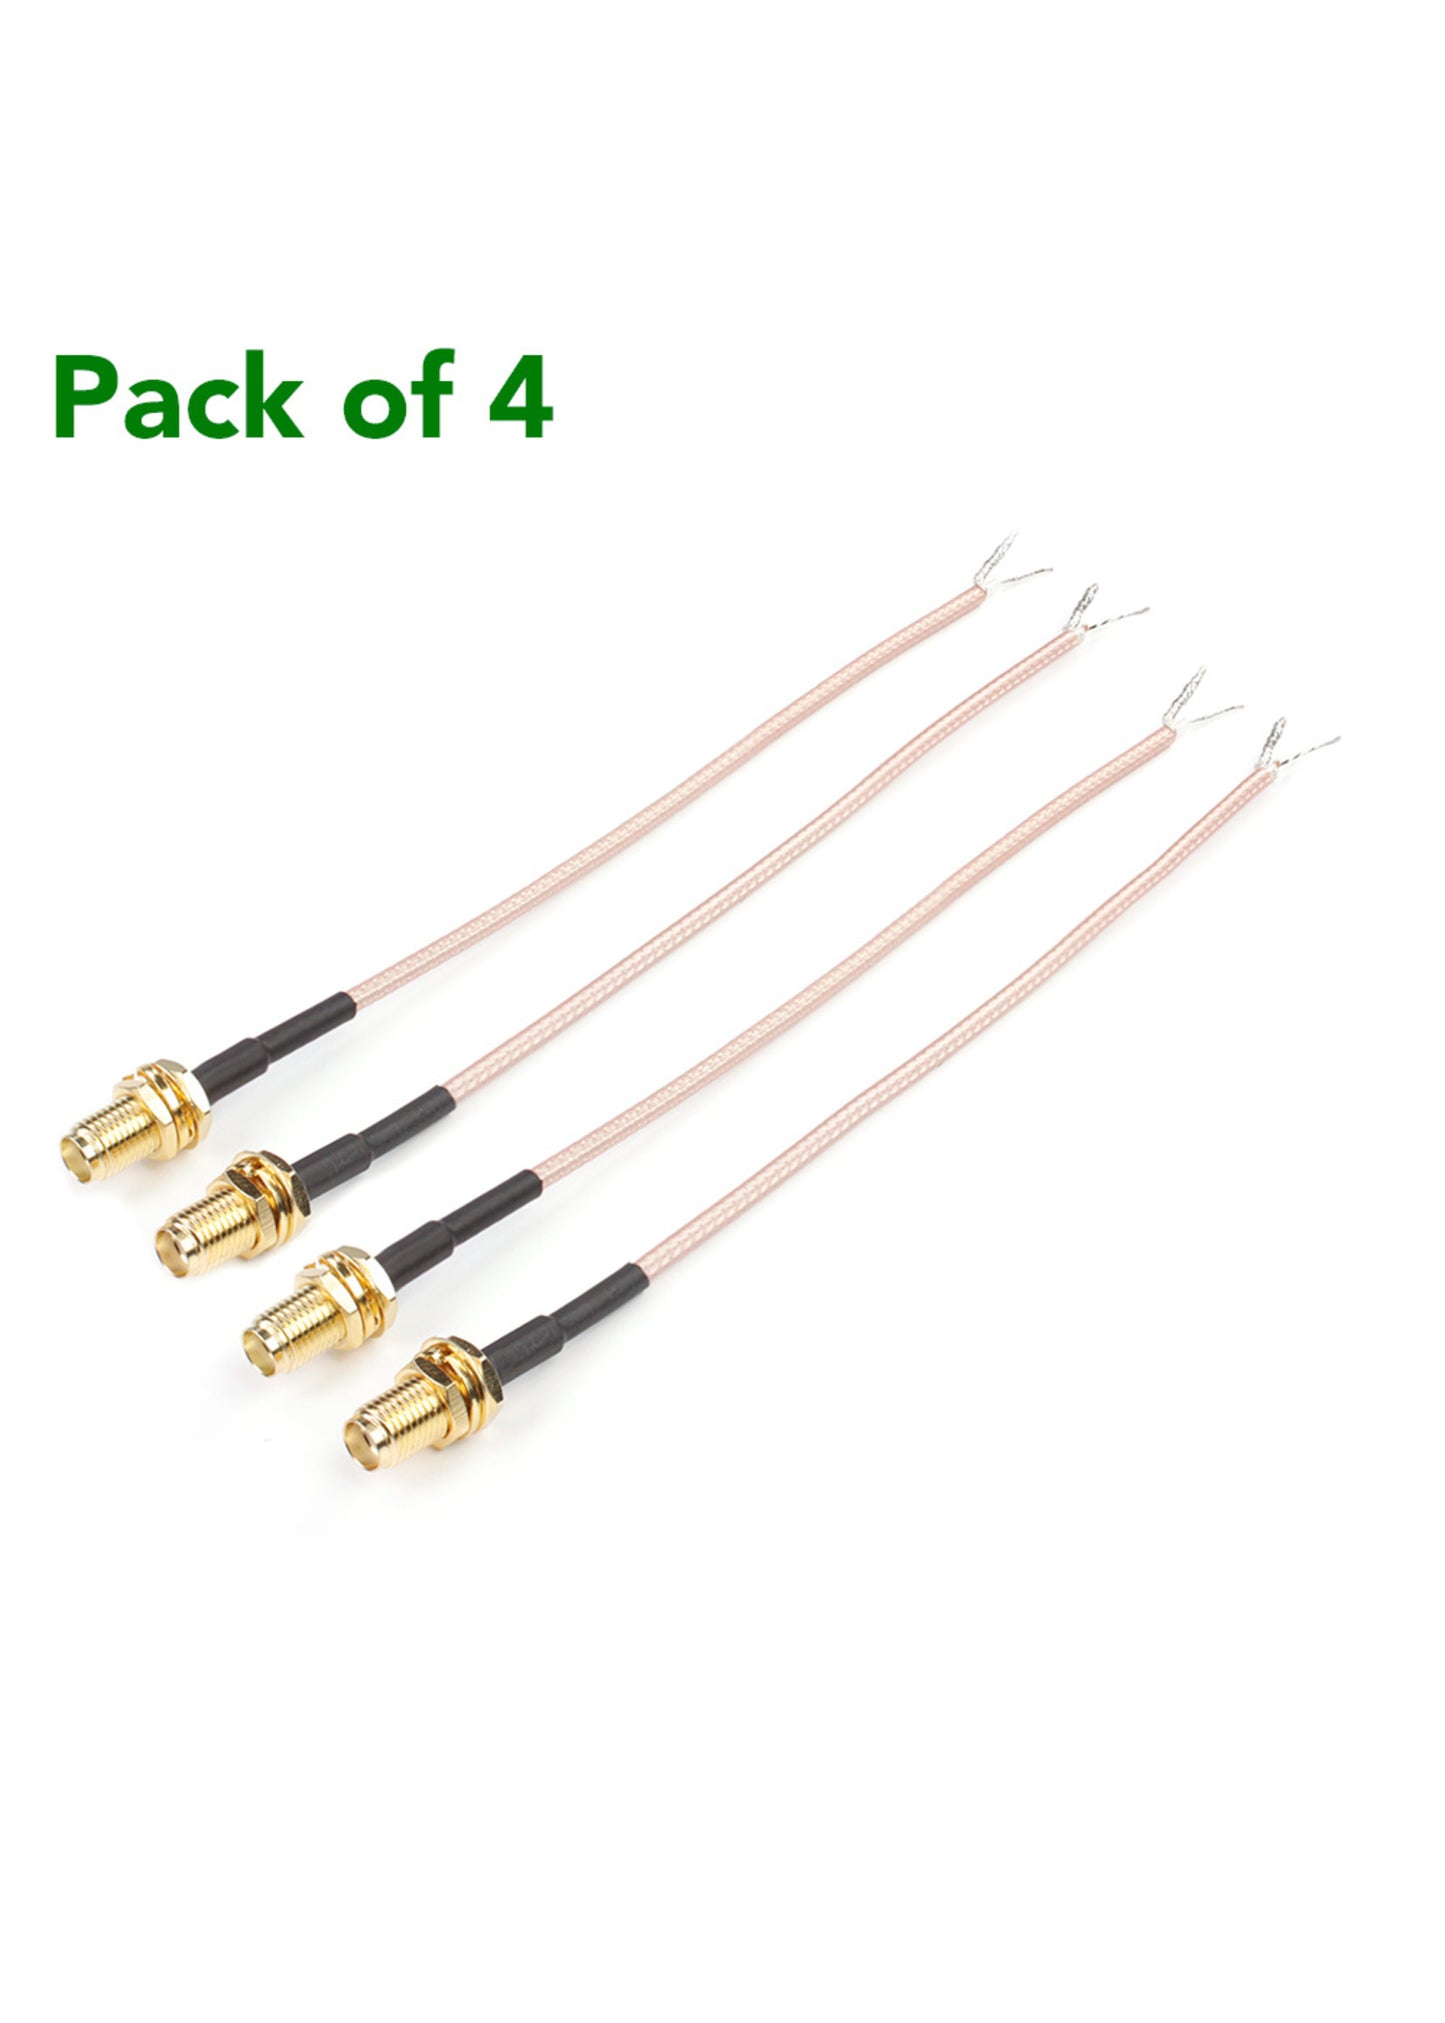 SMA to Tinned Lead cables (4 pack)